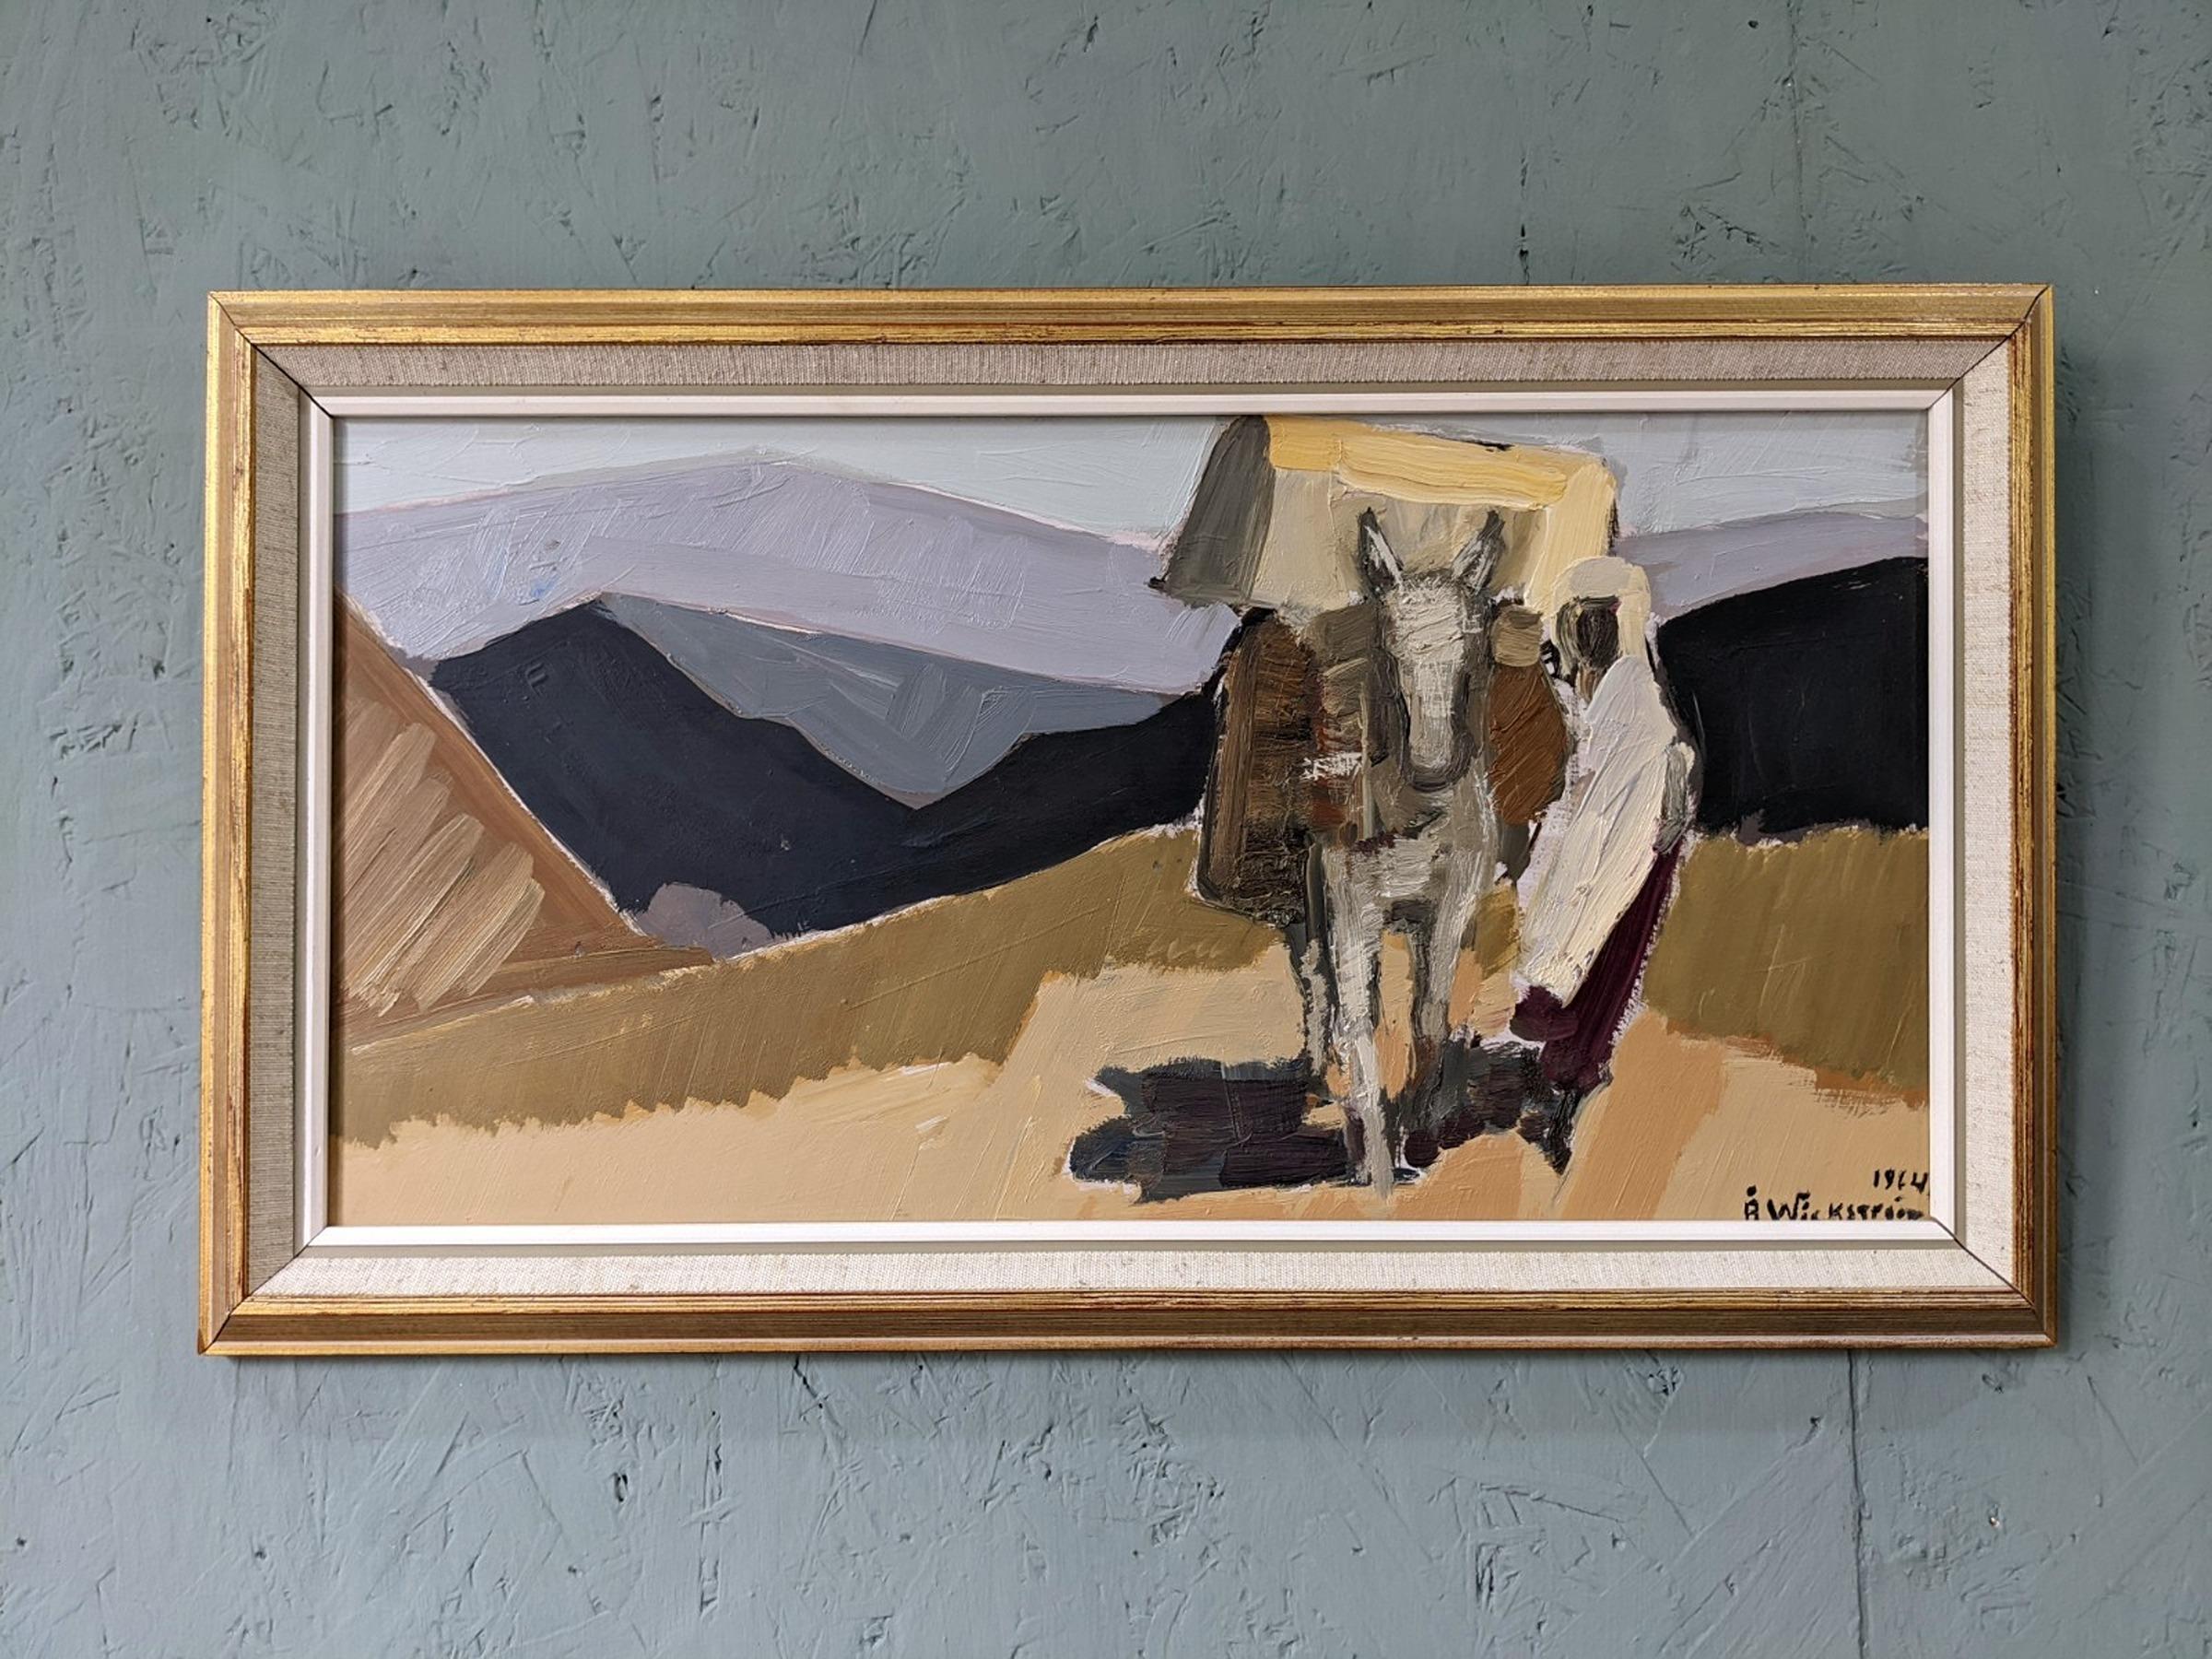 IN THE DESERT
Size: 30 x 52 cm (including frame)
Oil on Board

A very confidently executed modernist composition painted in oil onto board, and dated 1964.

This painting presents a figure and a donkey with a load on its back, crossing through a